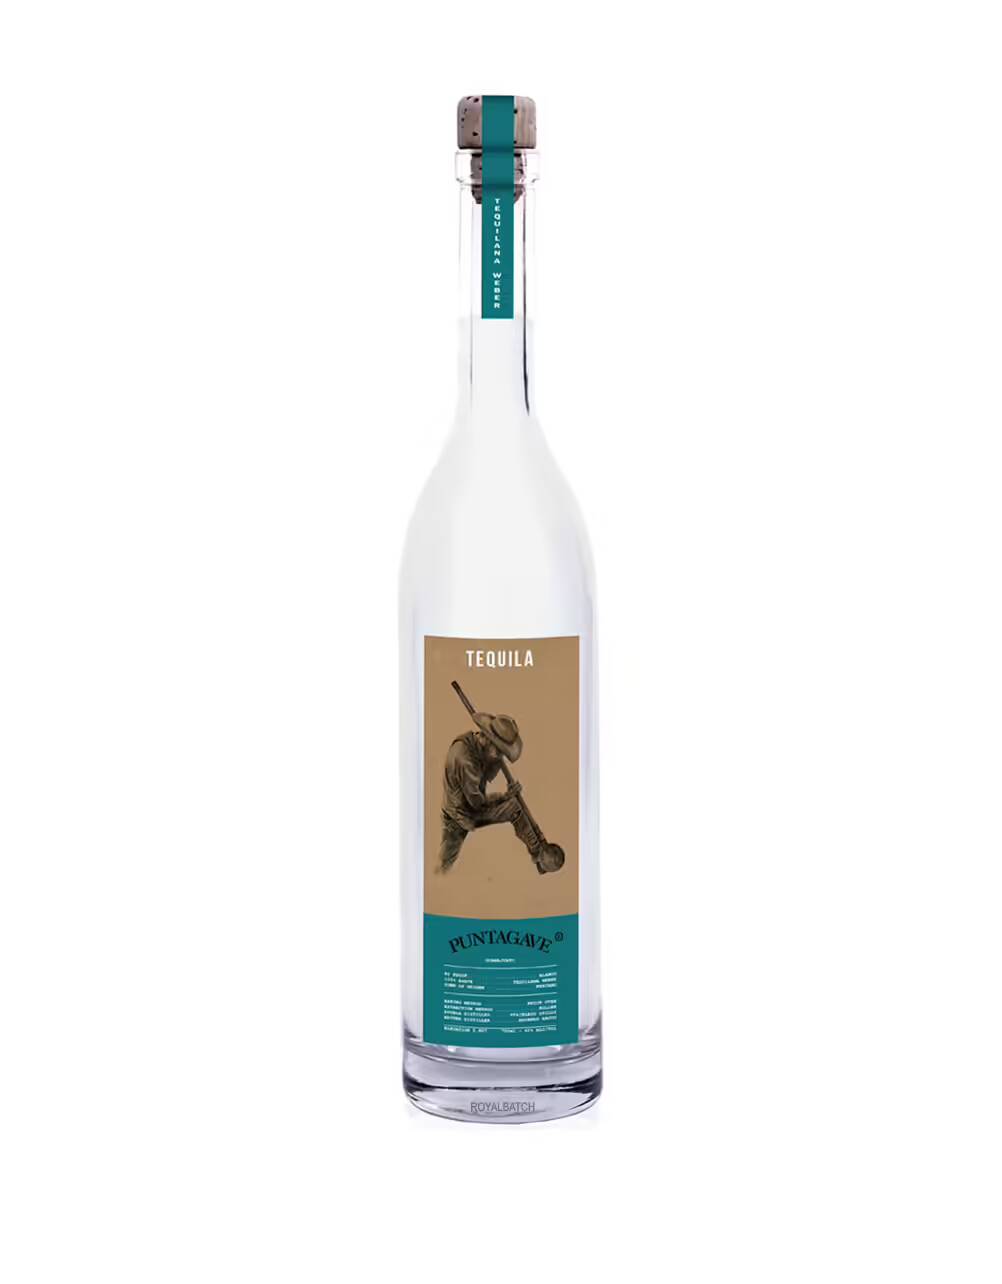 Puntagave Tequilana Weber Blanco Tequila